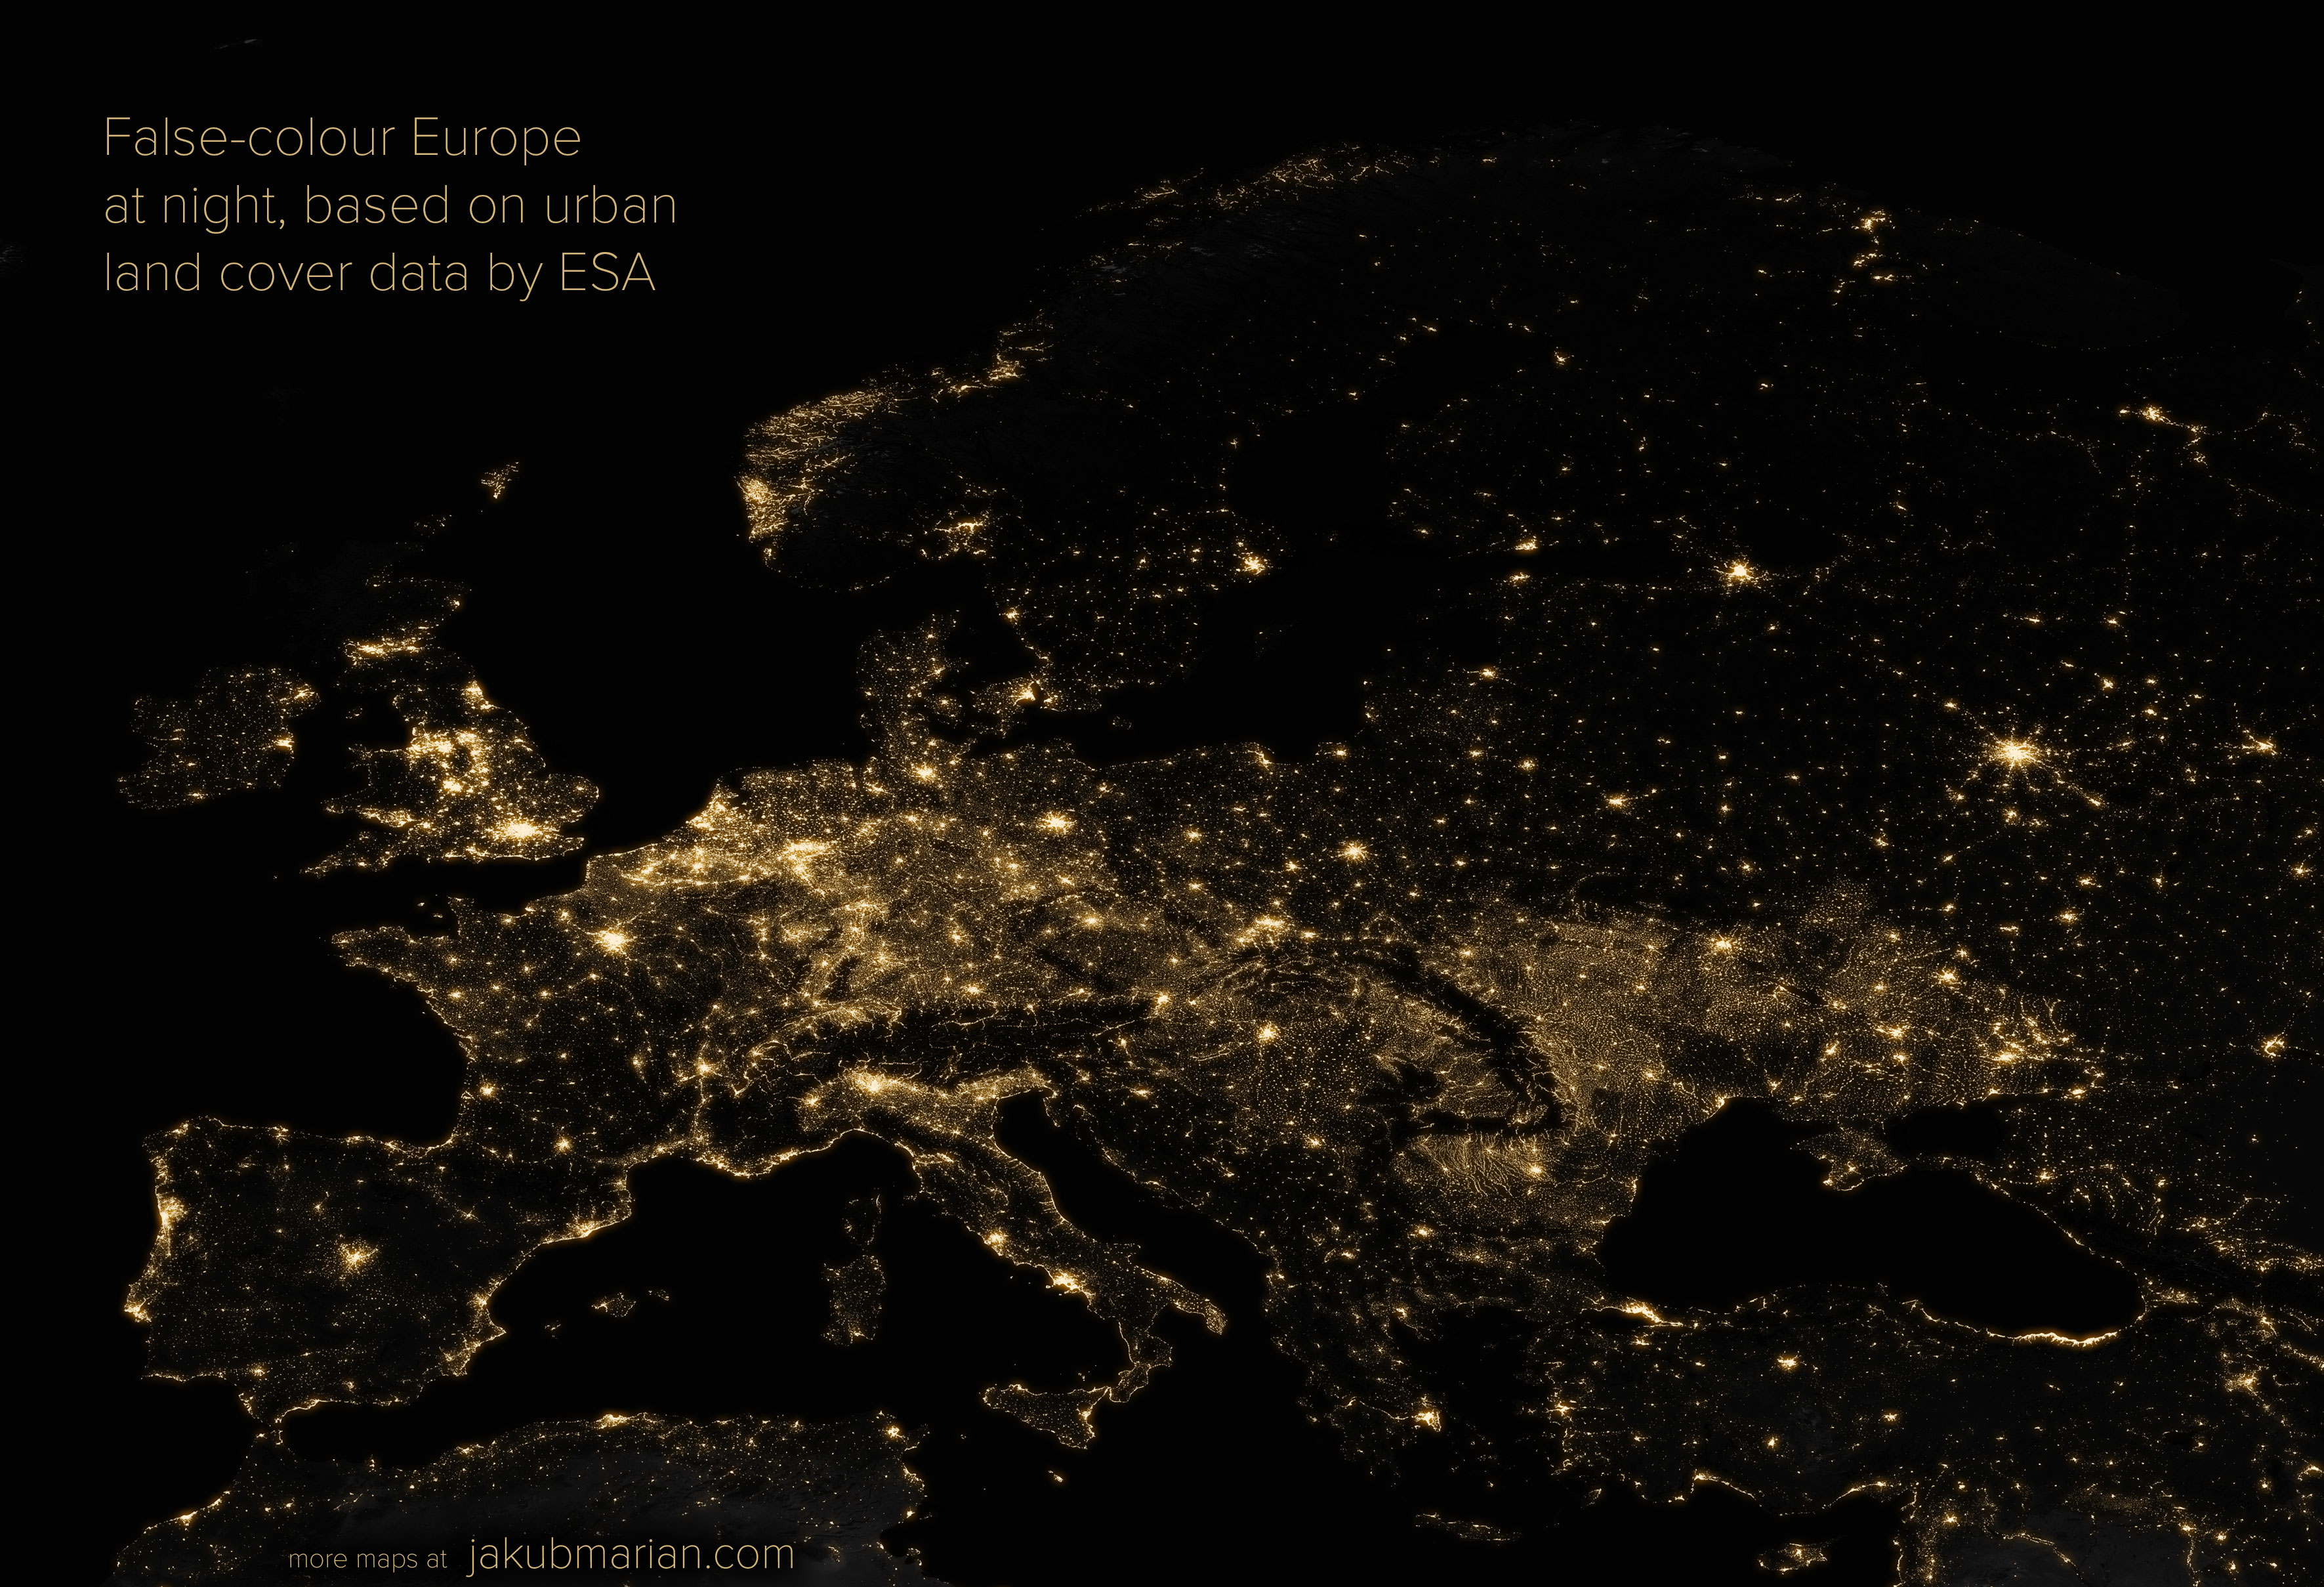 Europe at night generated from urban areas